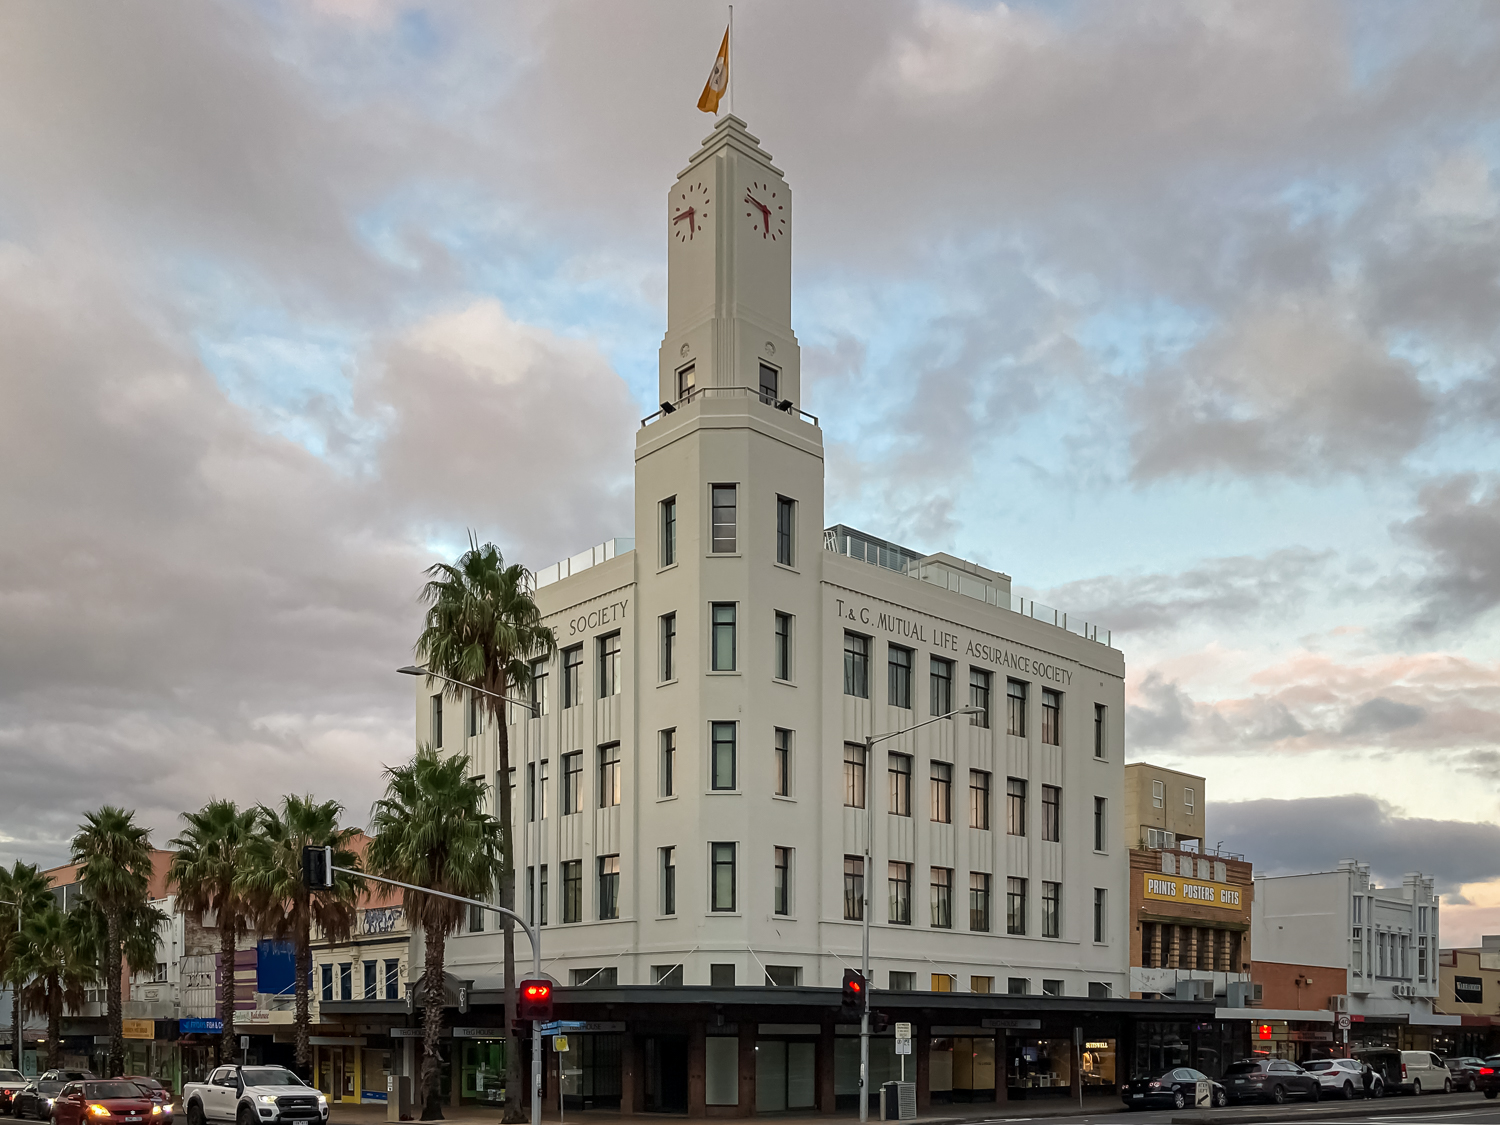 Geelong's T&G Building on a street corner at dusk